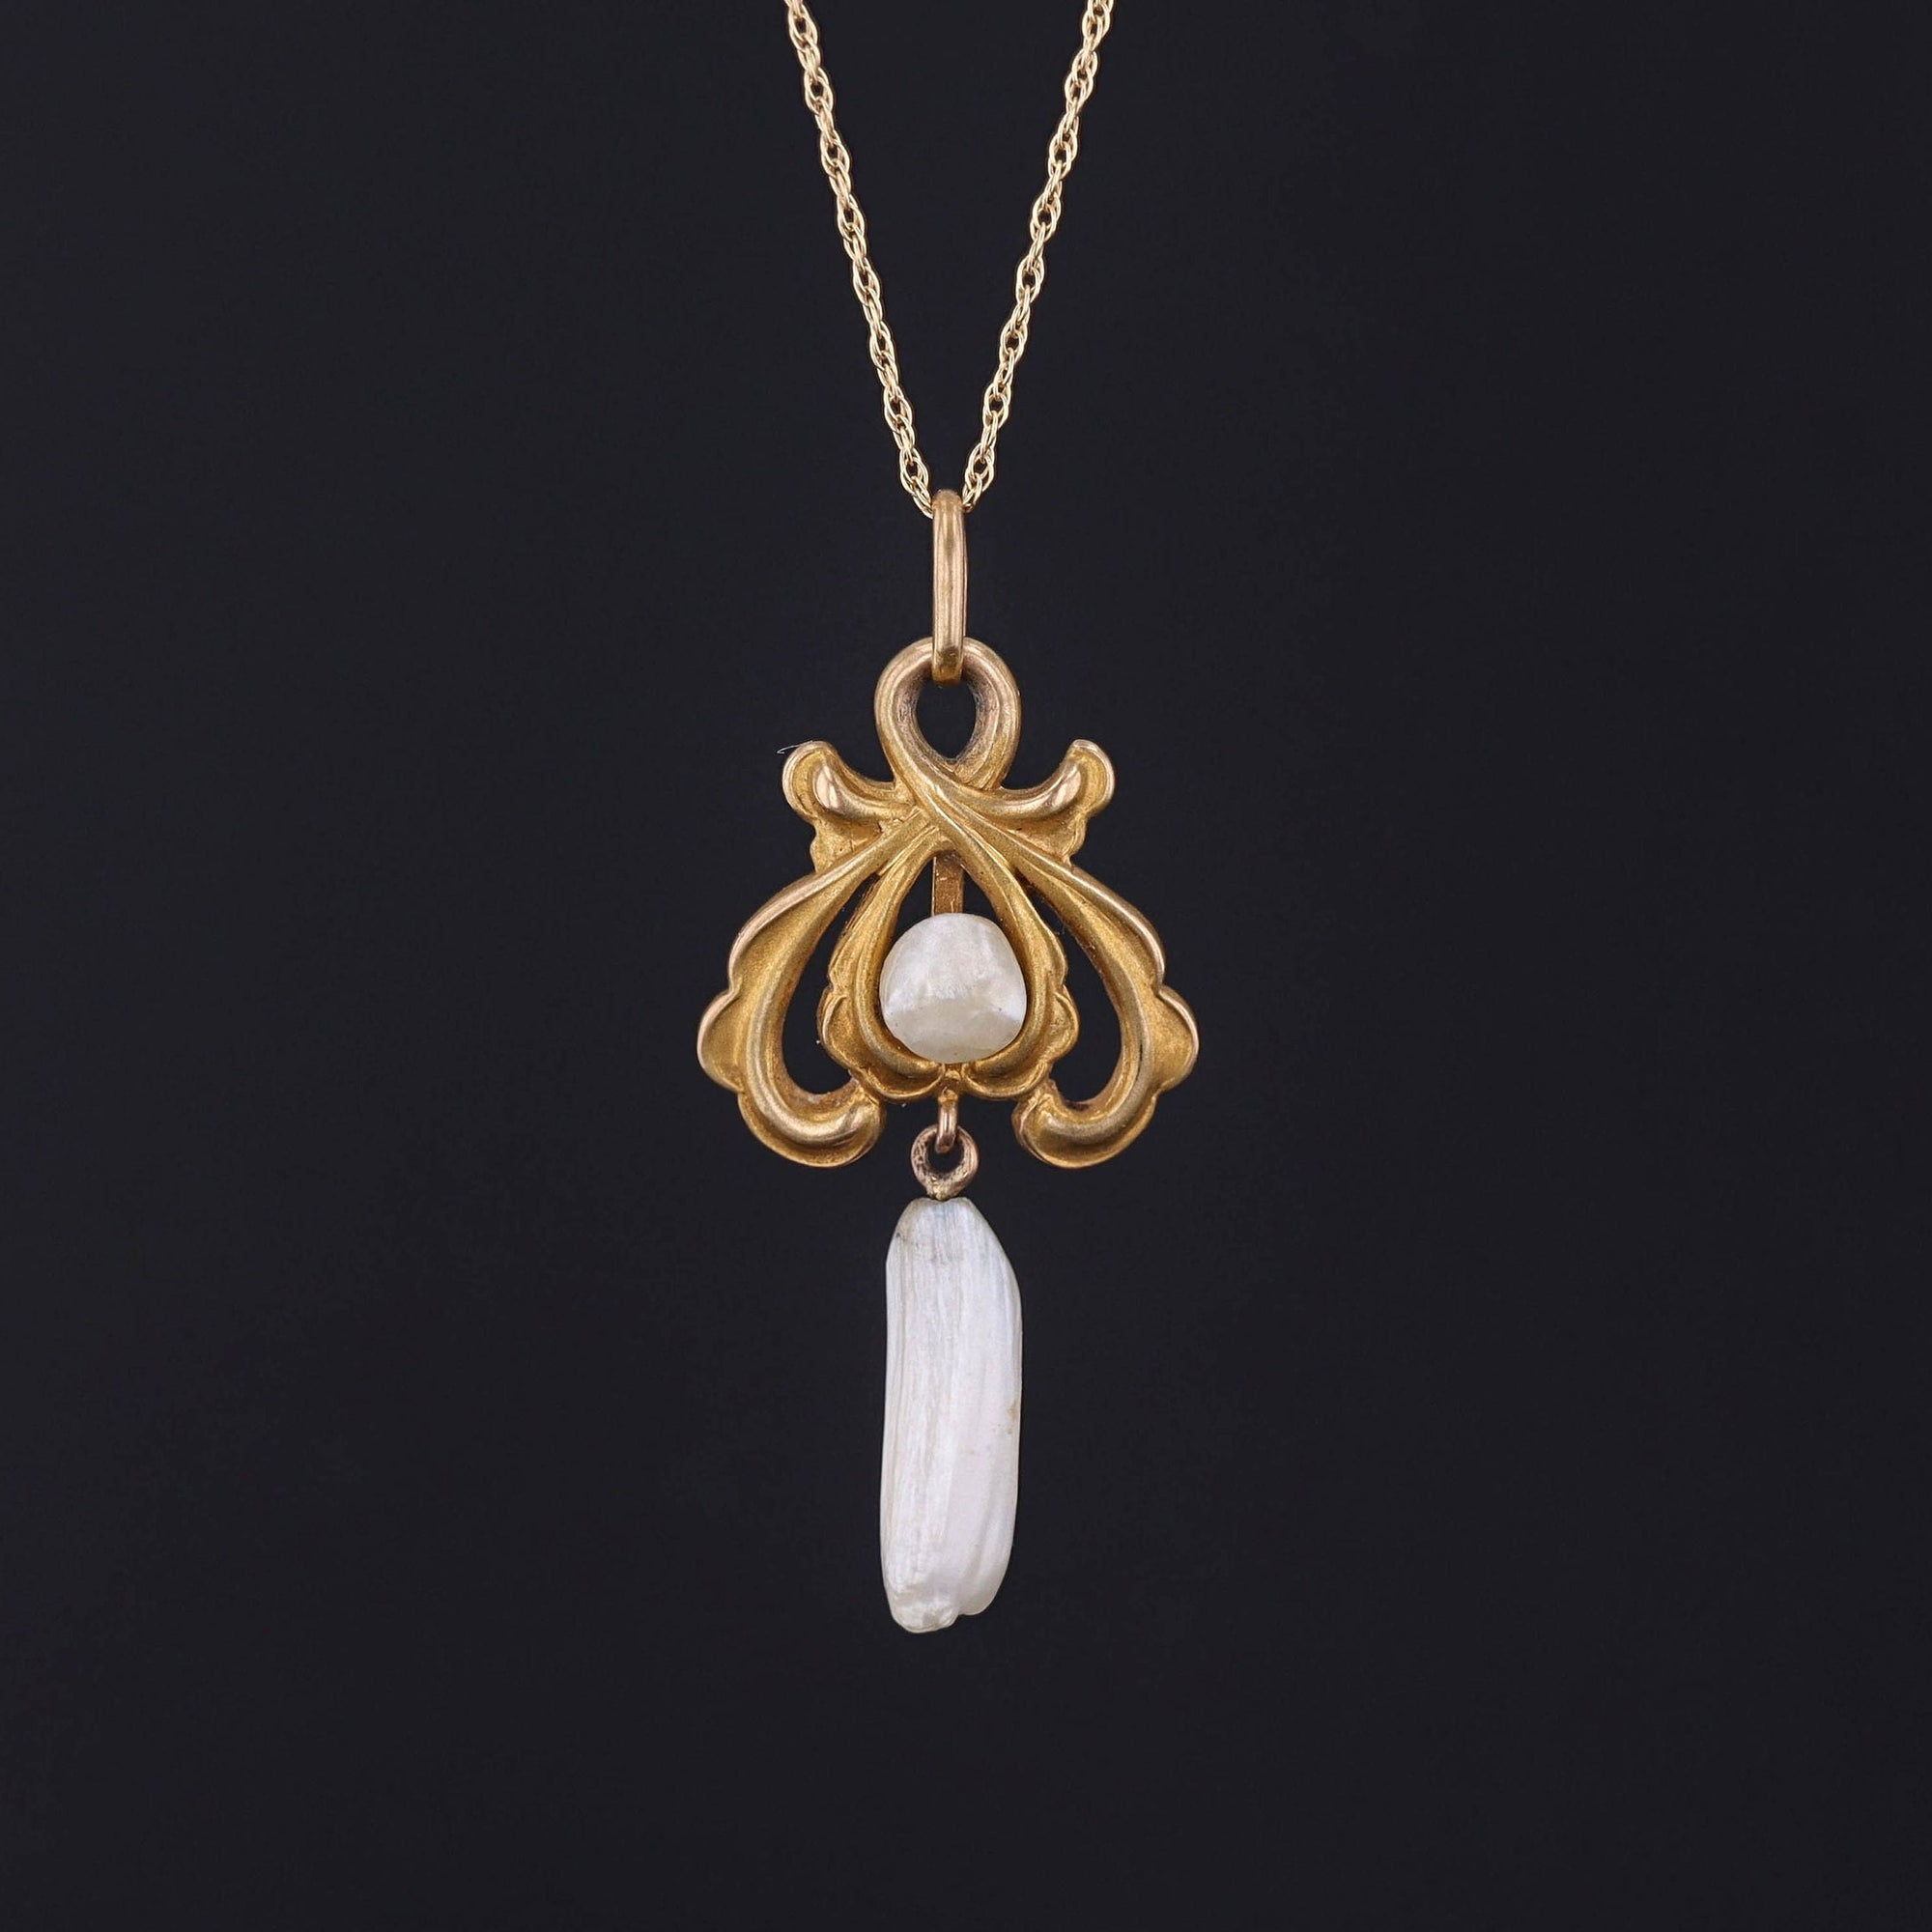 Pearl Lavalier Necklace | 14k Gold & Pearl Necklace 